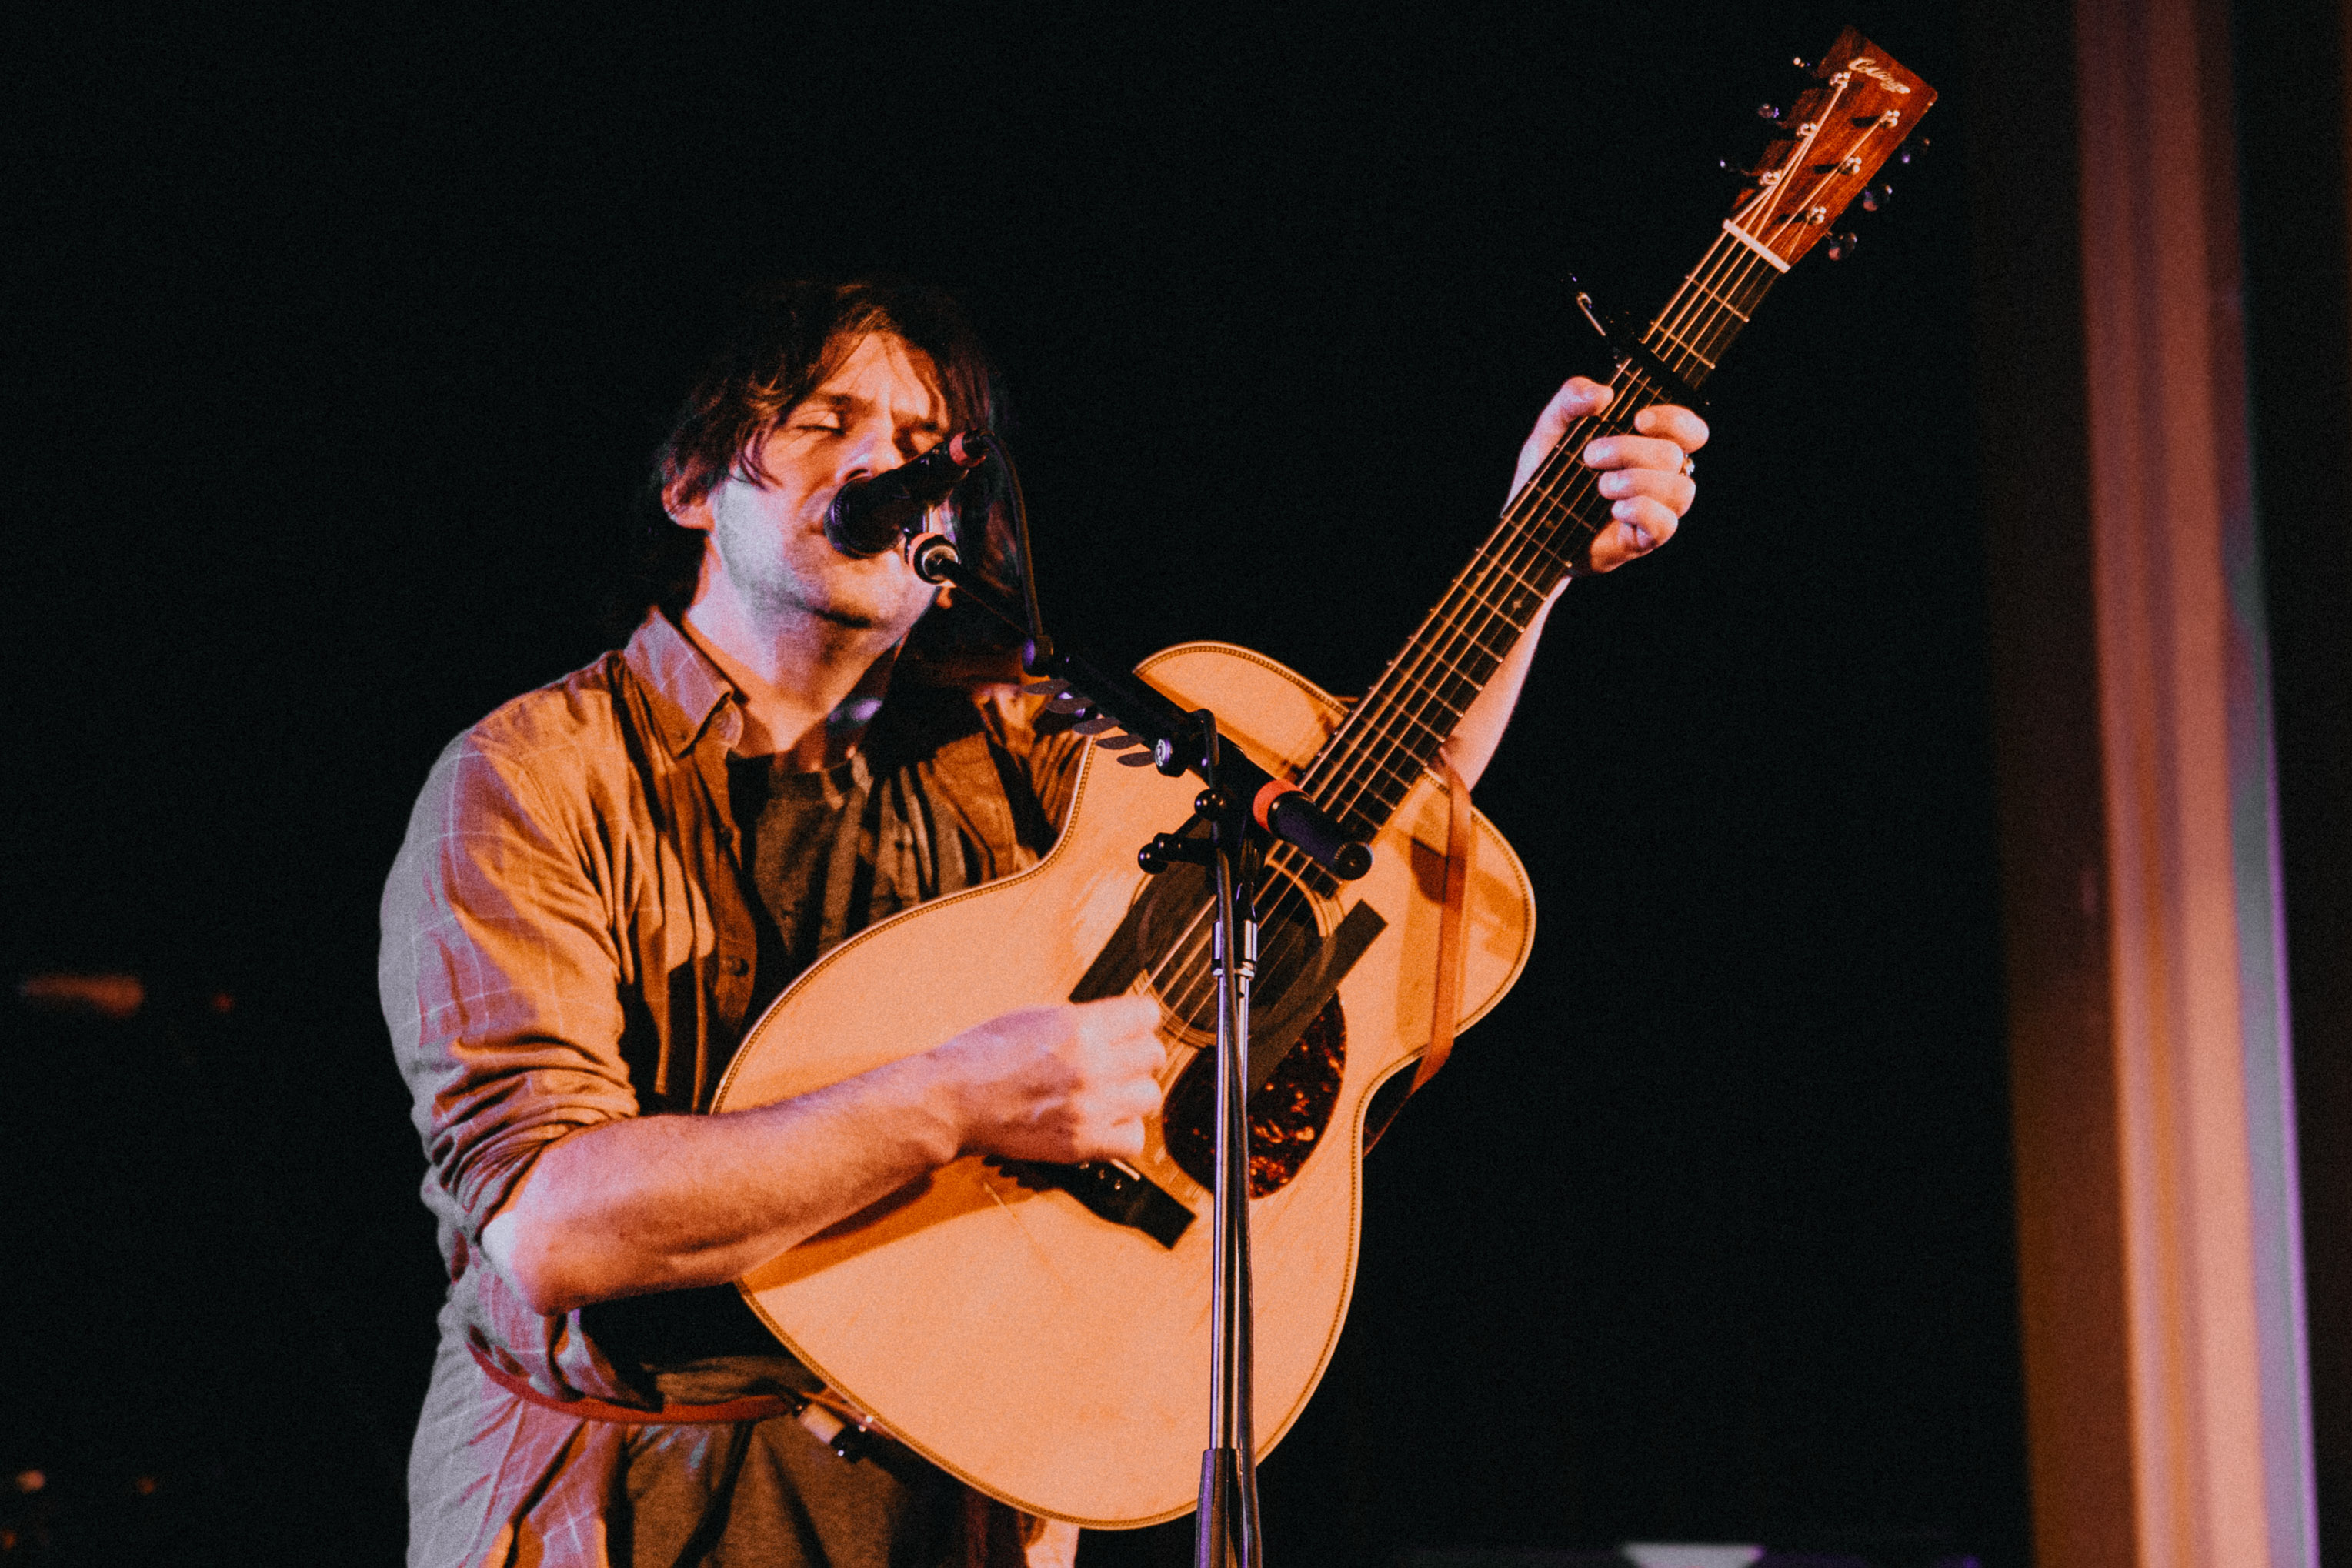 Conor Oberst at Asbury Hall (09/14/17)